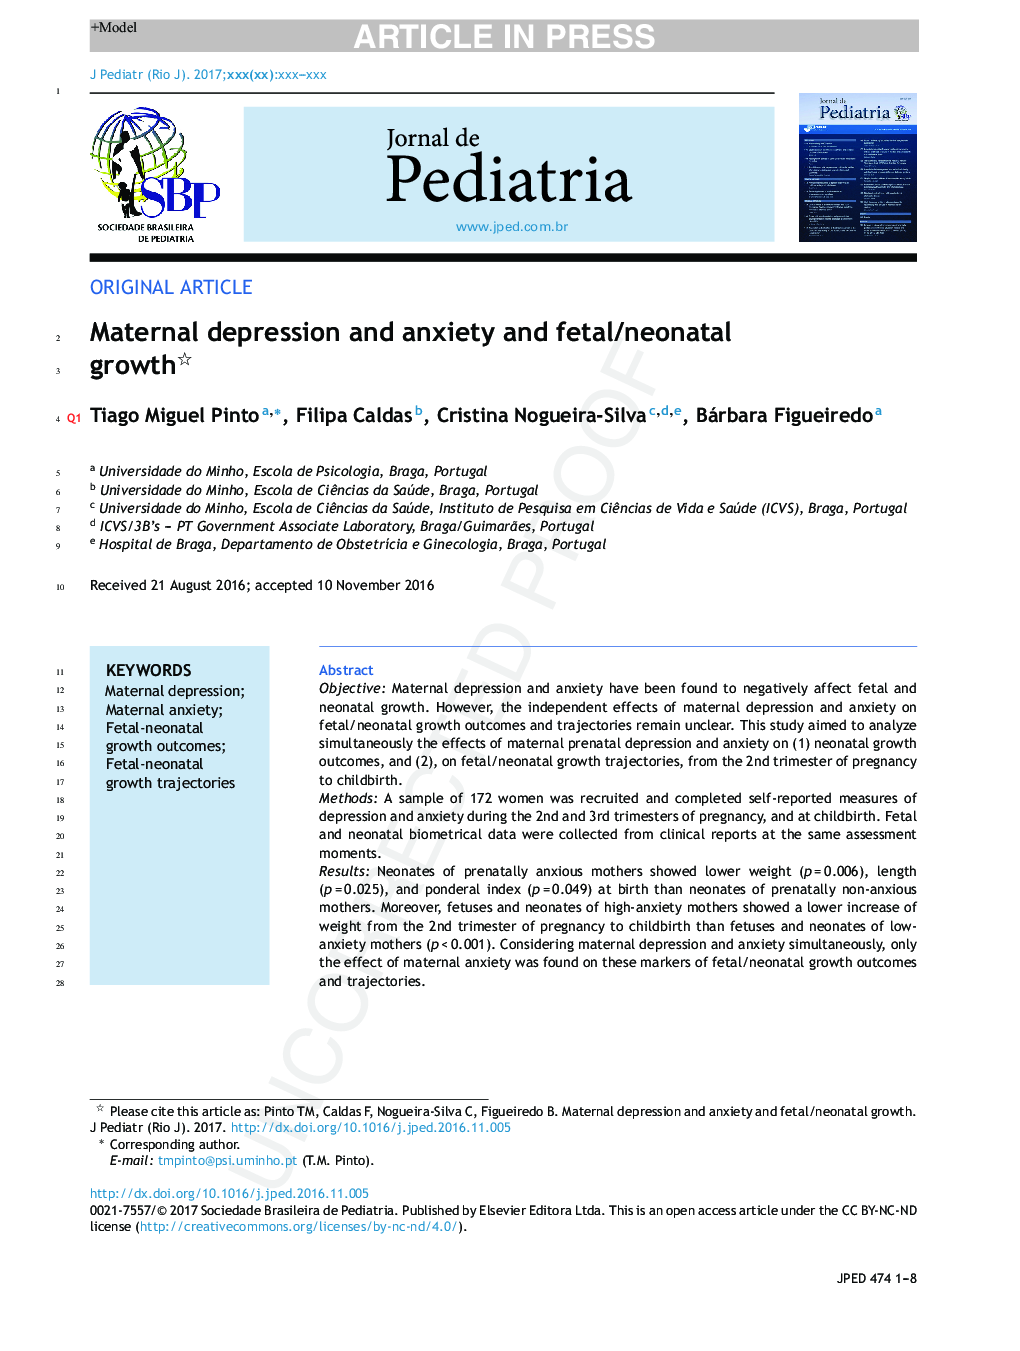 Maternal depression and anxiety and fetal-neonatal growth